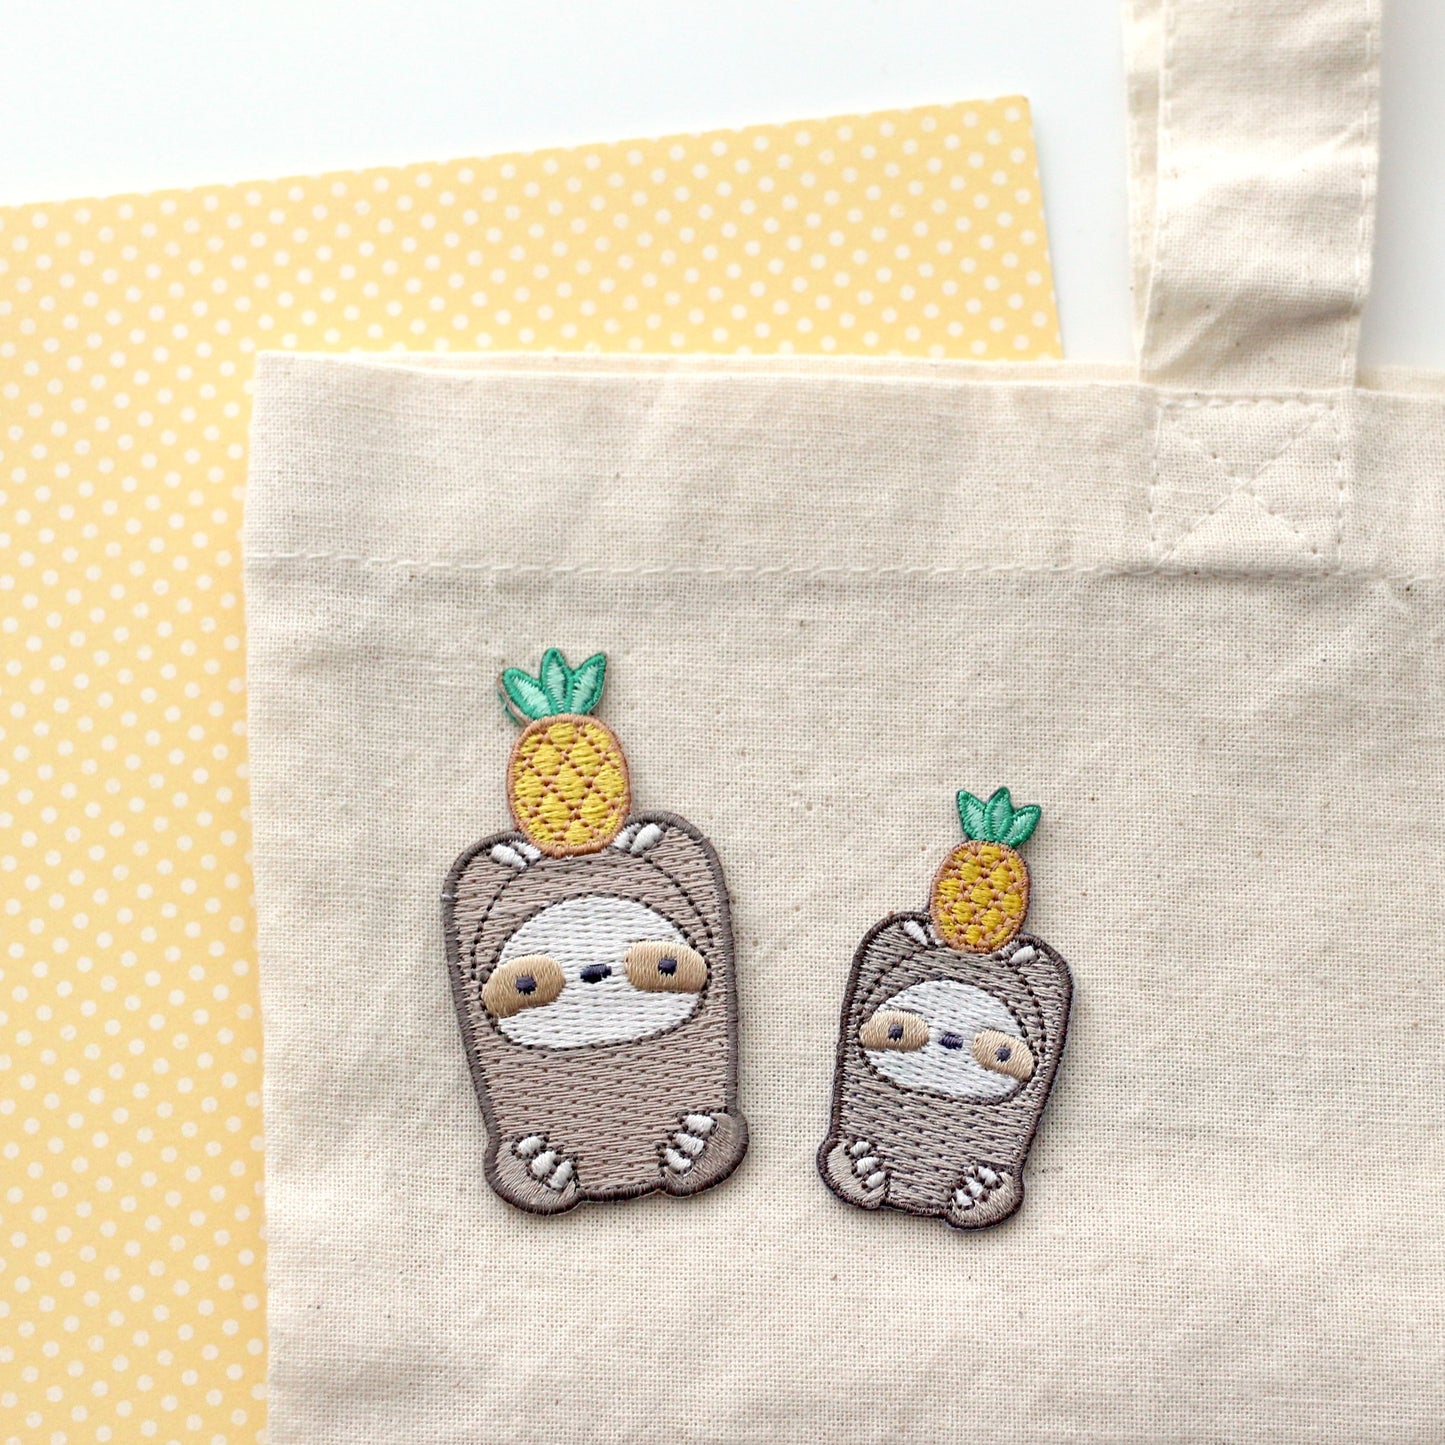 Pineapple Sloth Patches - Sloth Applique Patches